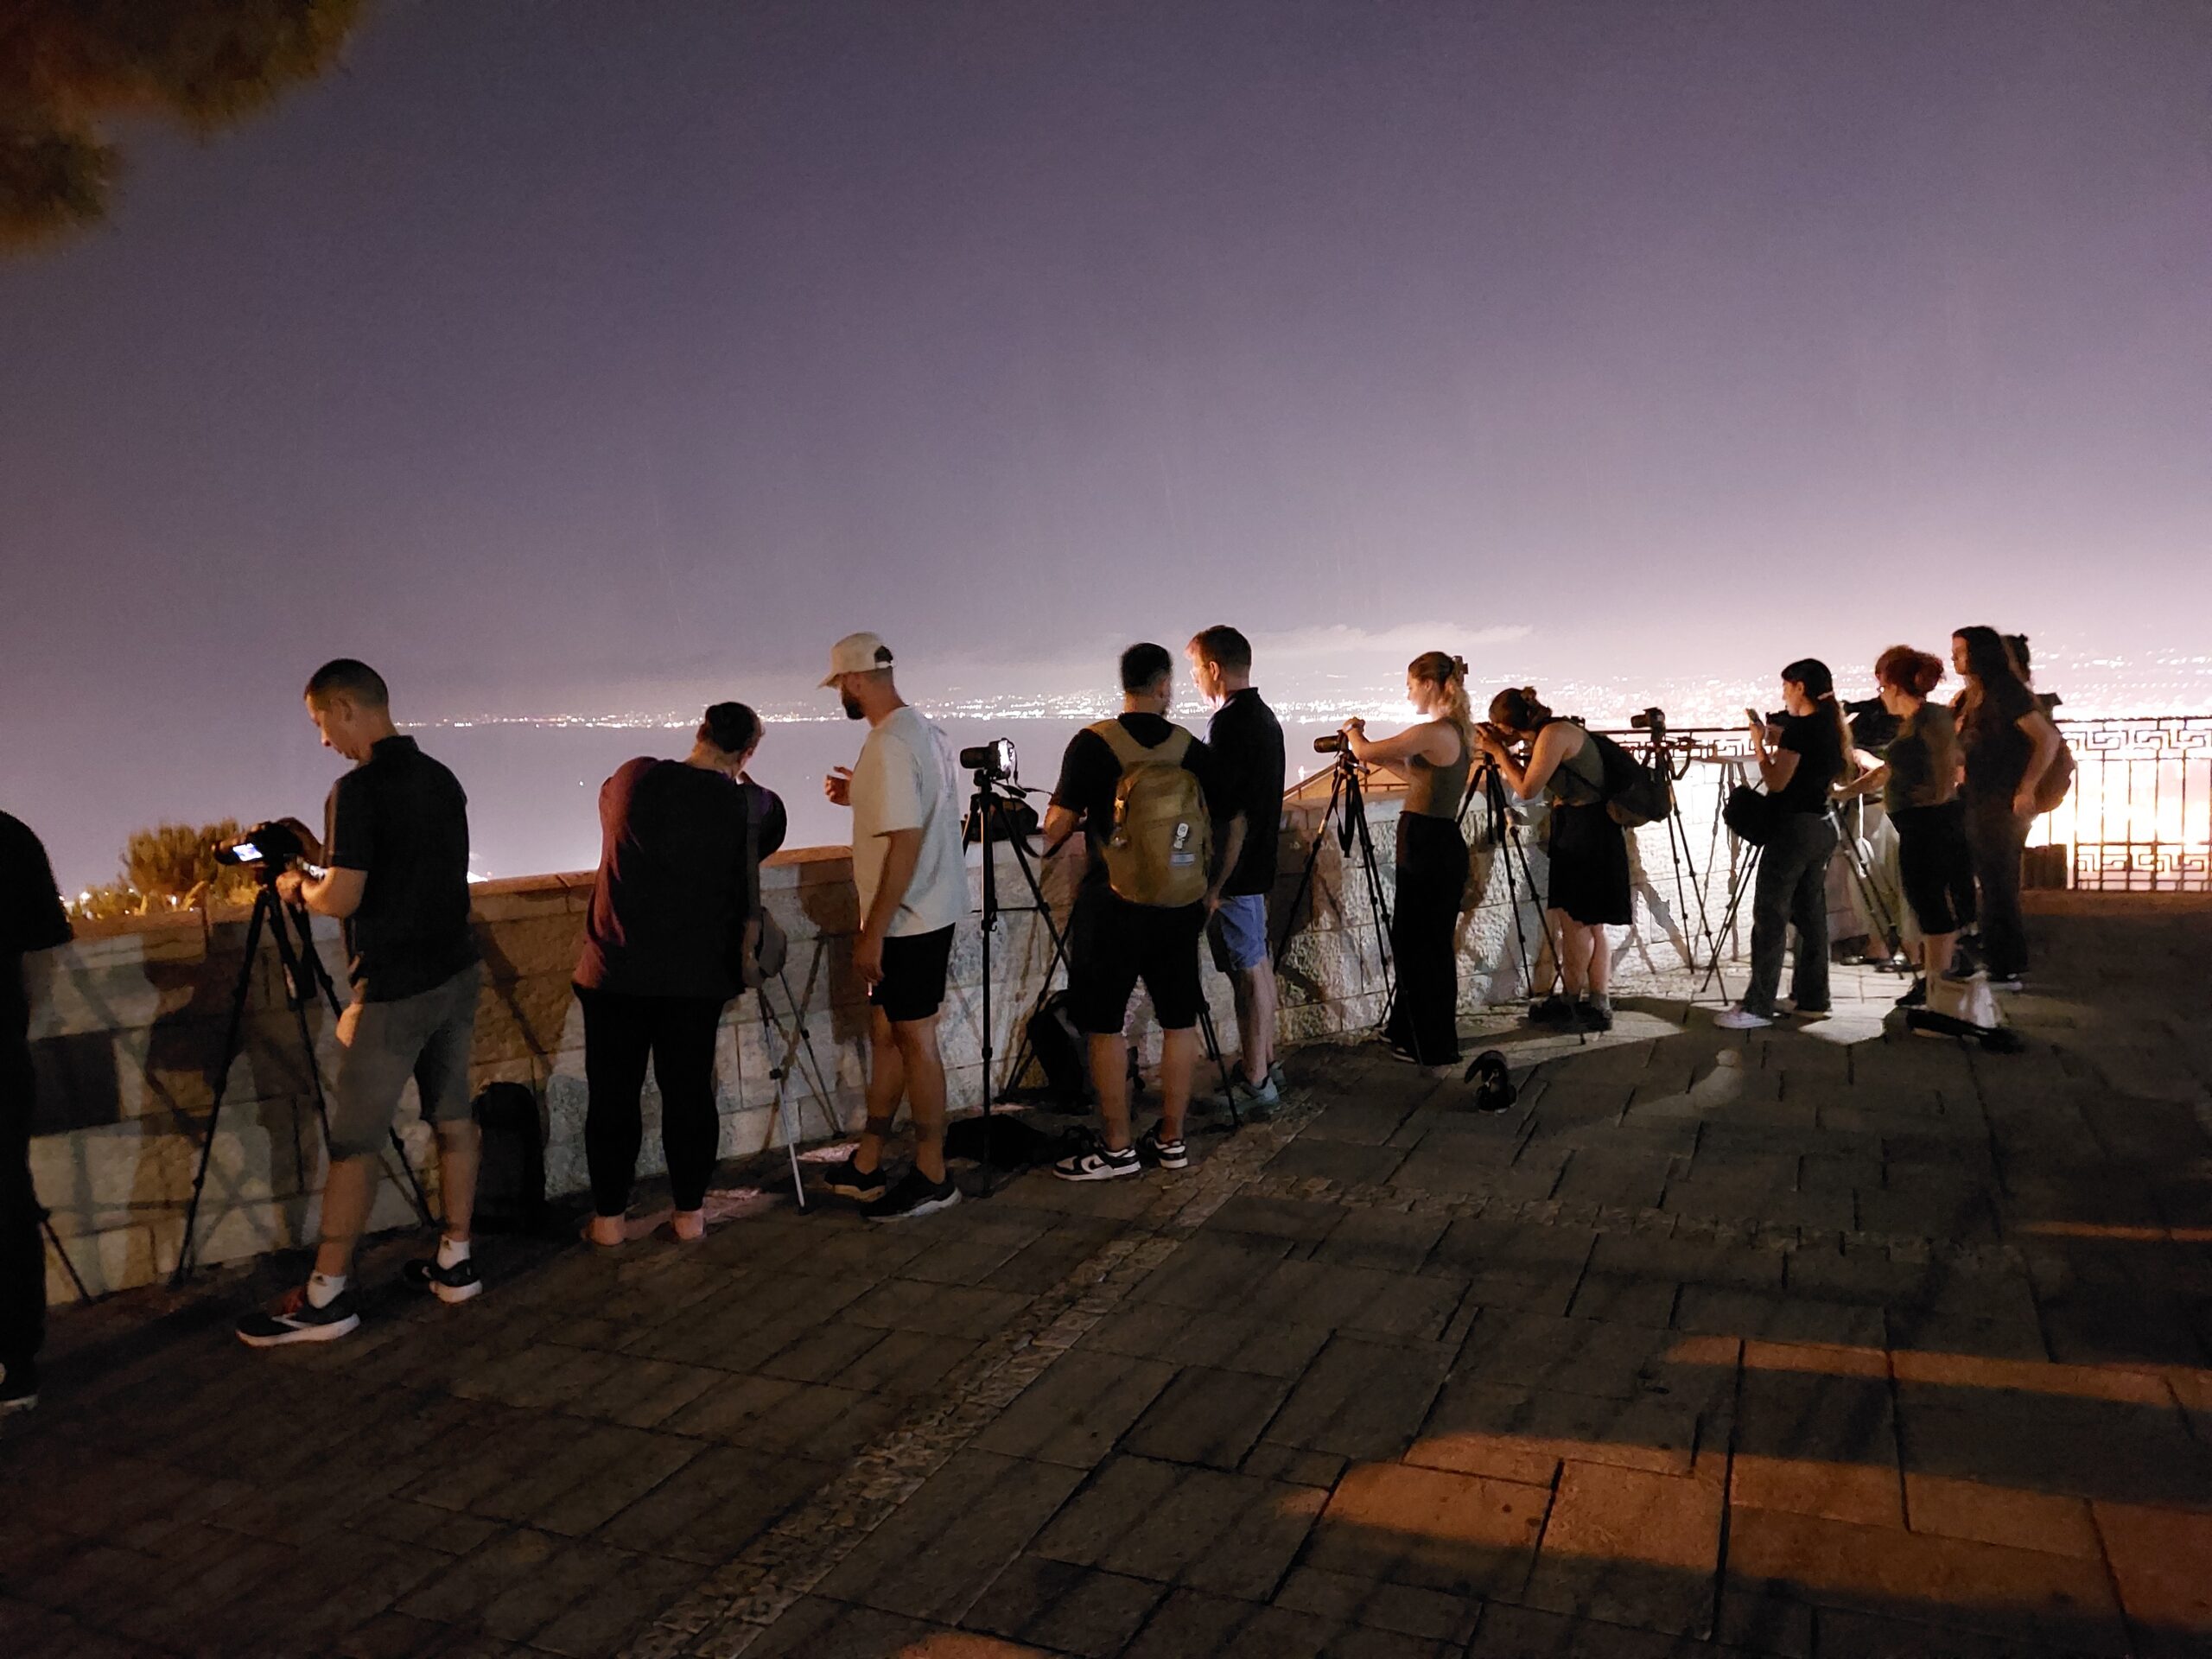 Night Photography Workshop: Capturing the City's Nocturnal Charm